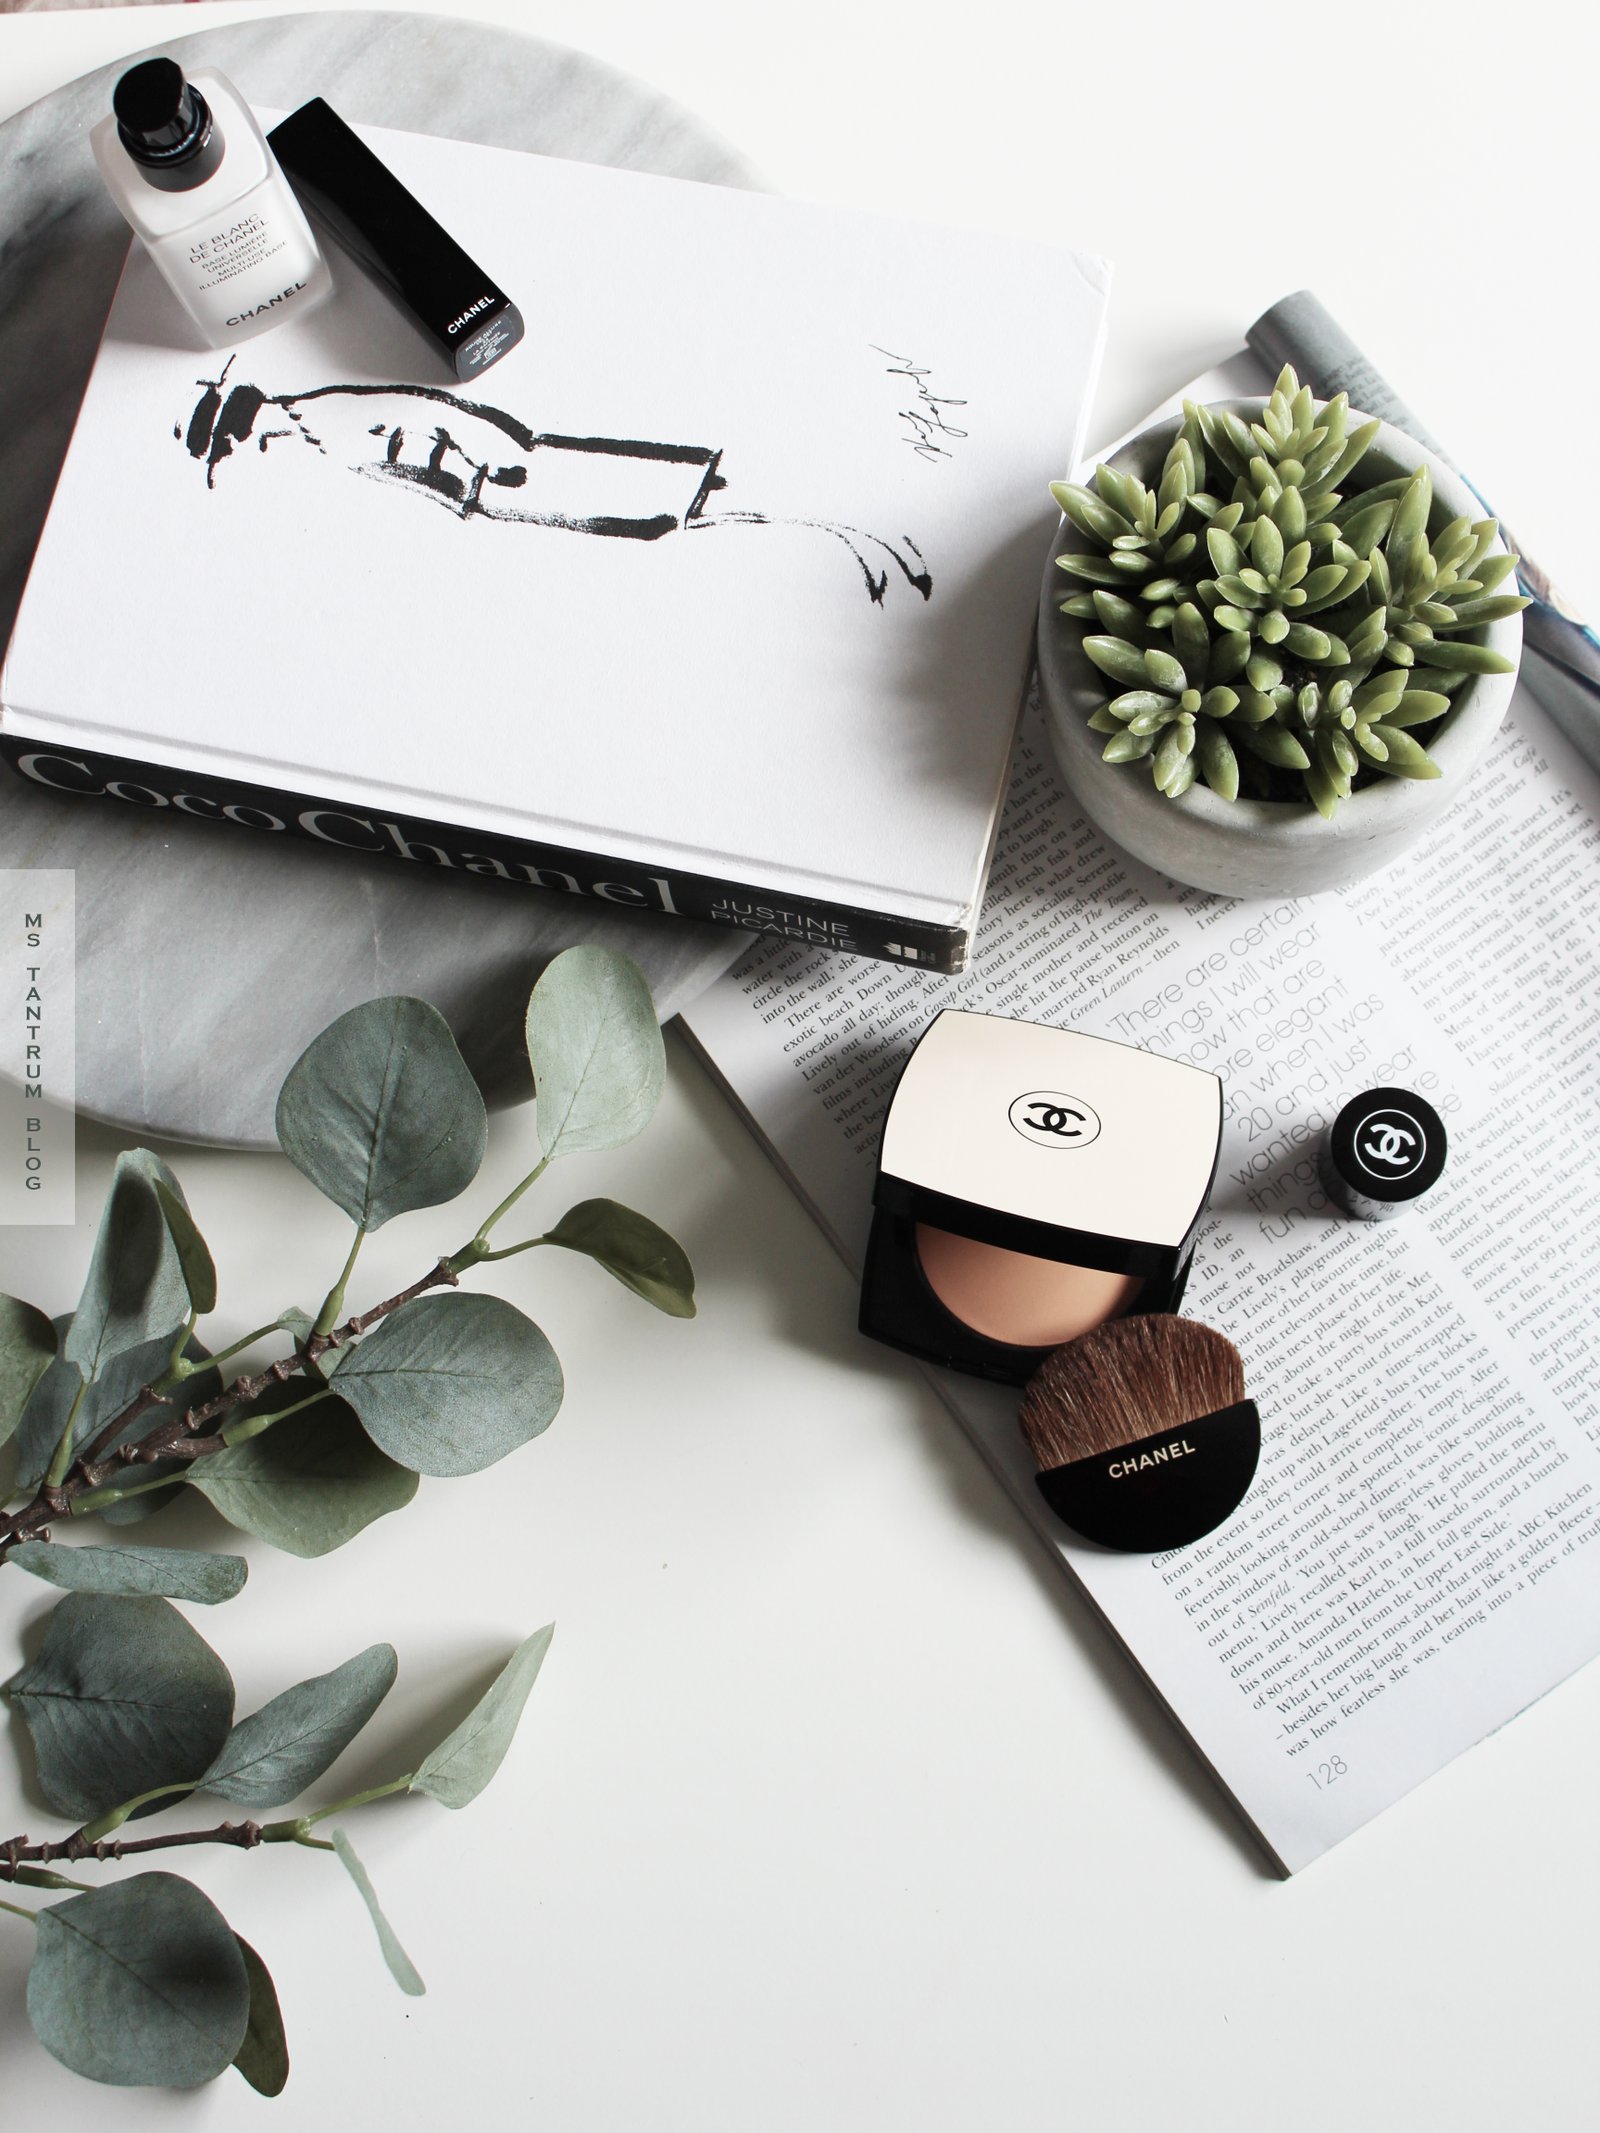 Chanel Les Beiges Healthy Glow Sheer Powder Review - Ms Tantrum Blog